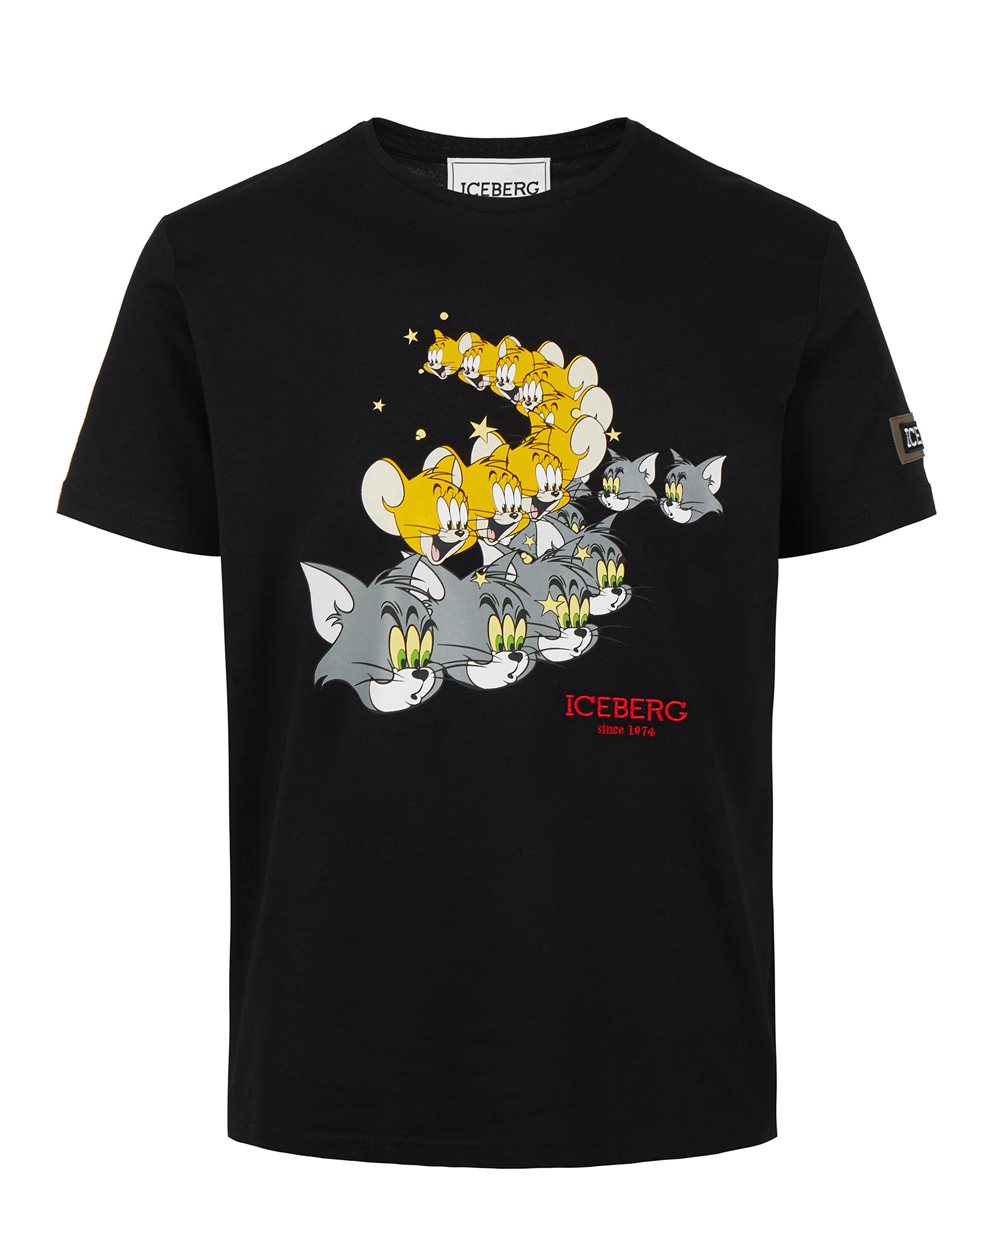 Black T-shirt with cartoon graphics - Clothing | Iceberg - Official Website